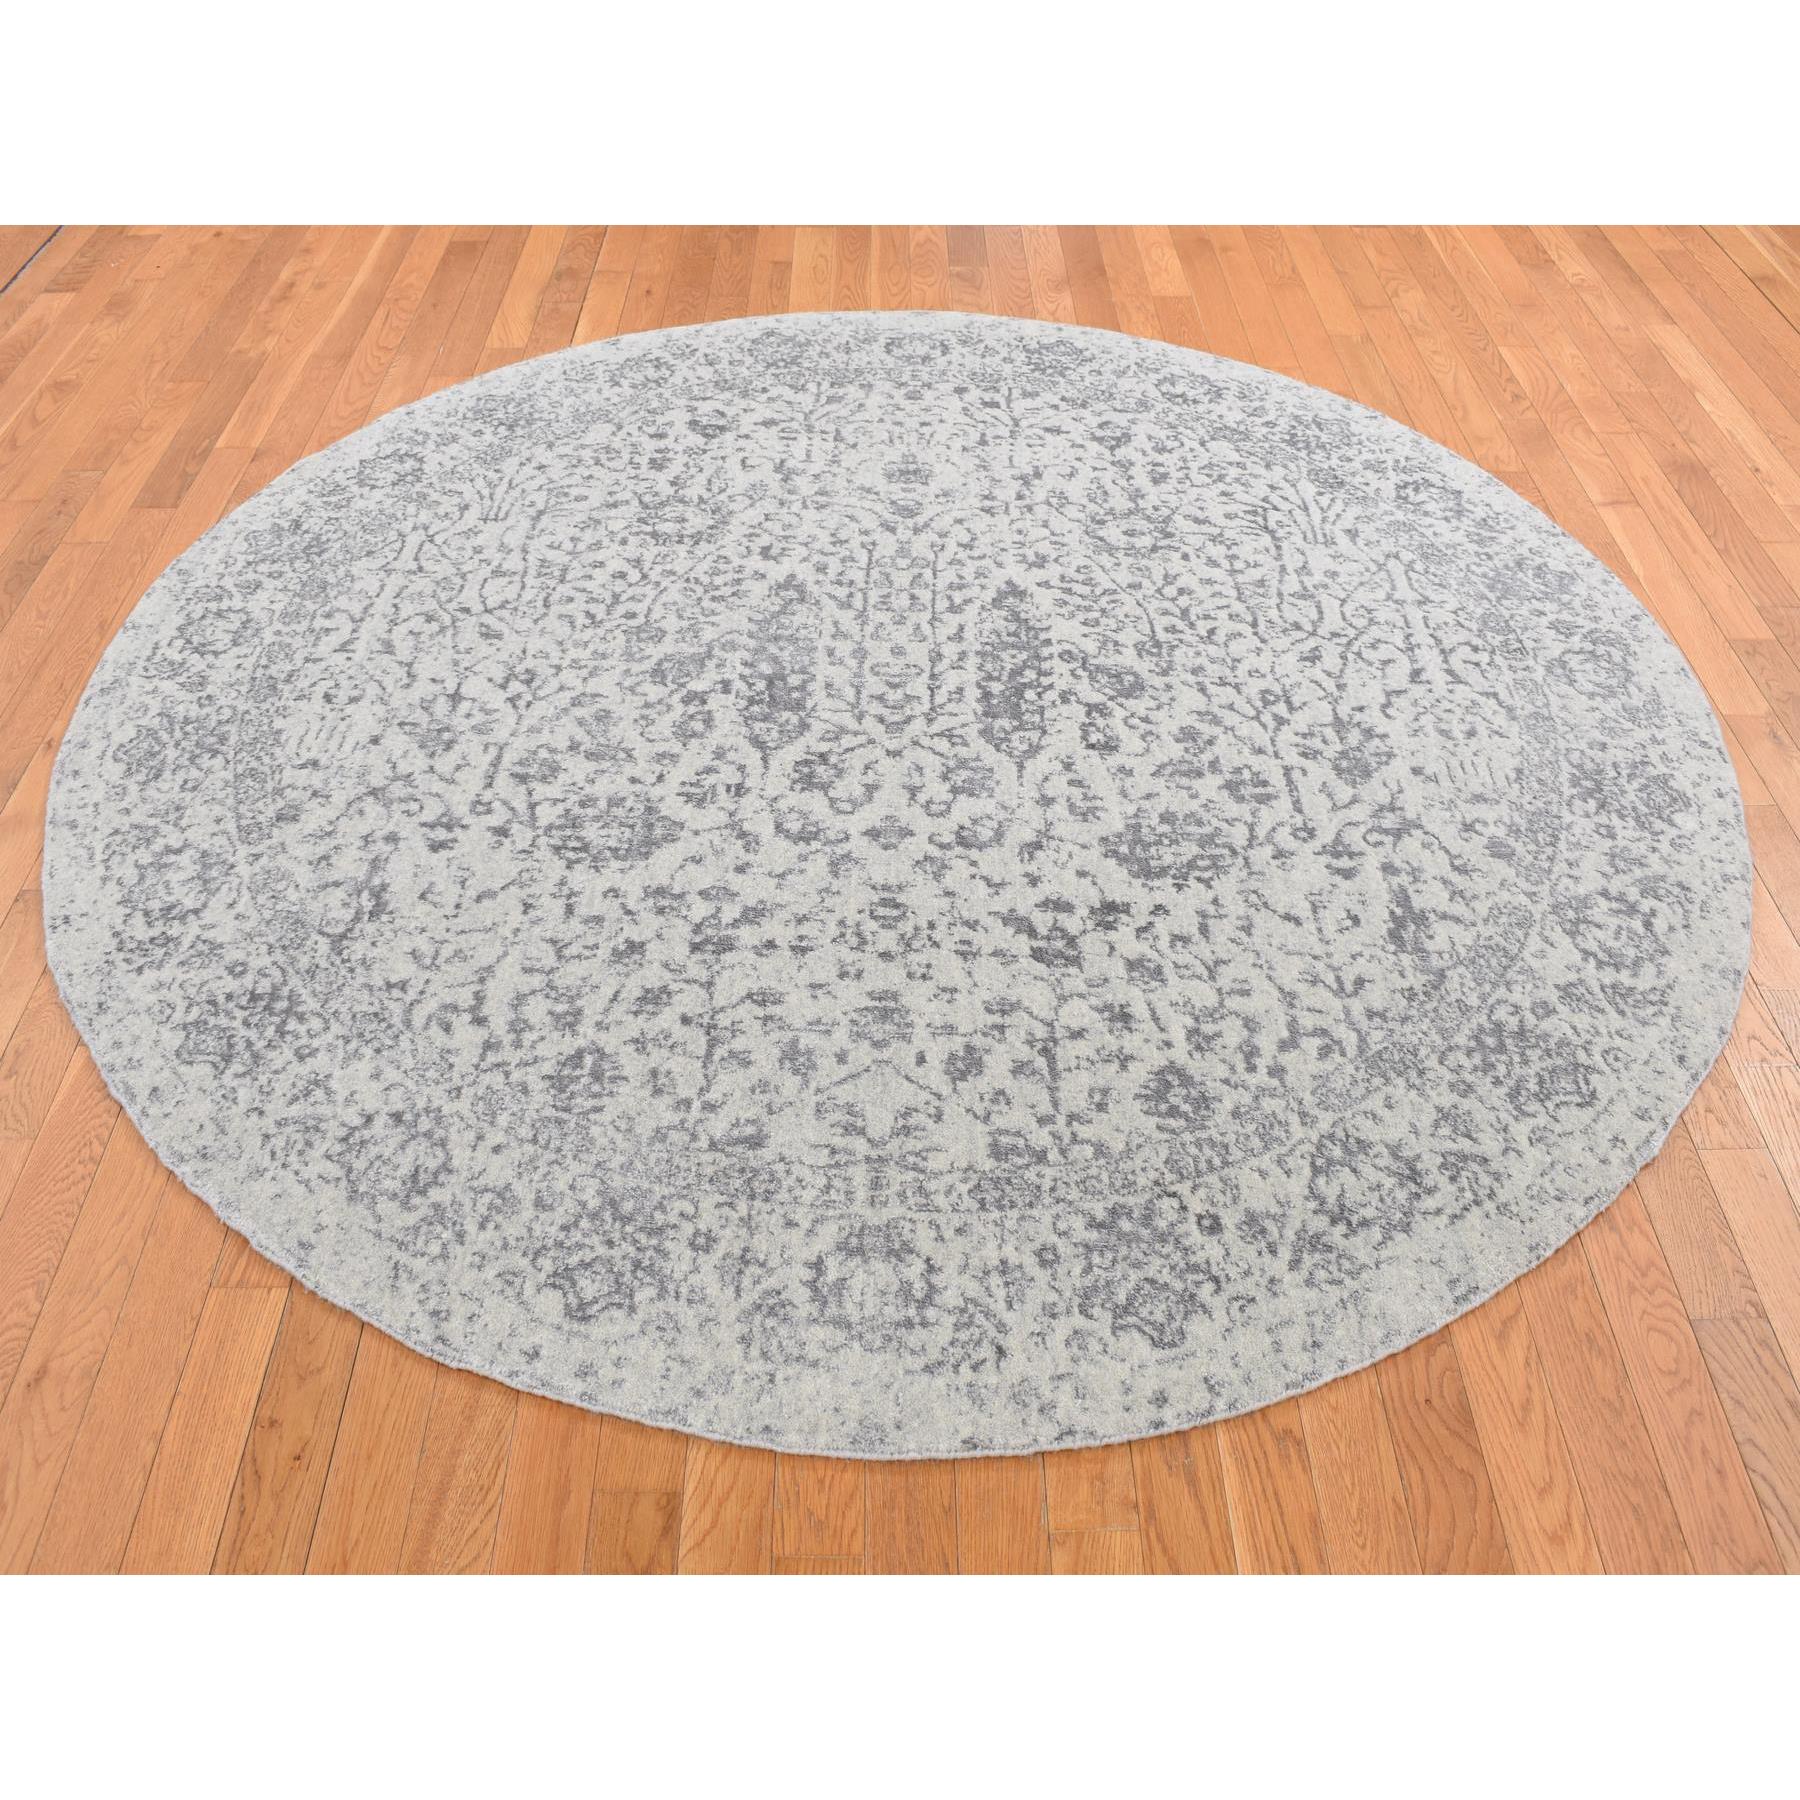 7'9"x7'9" Gainsboro Gray, Jacquard Hand Loomed, Broken Cypress Tree Design, Wool and Silk, Thick and Plush, Round Oriental Rug 